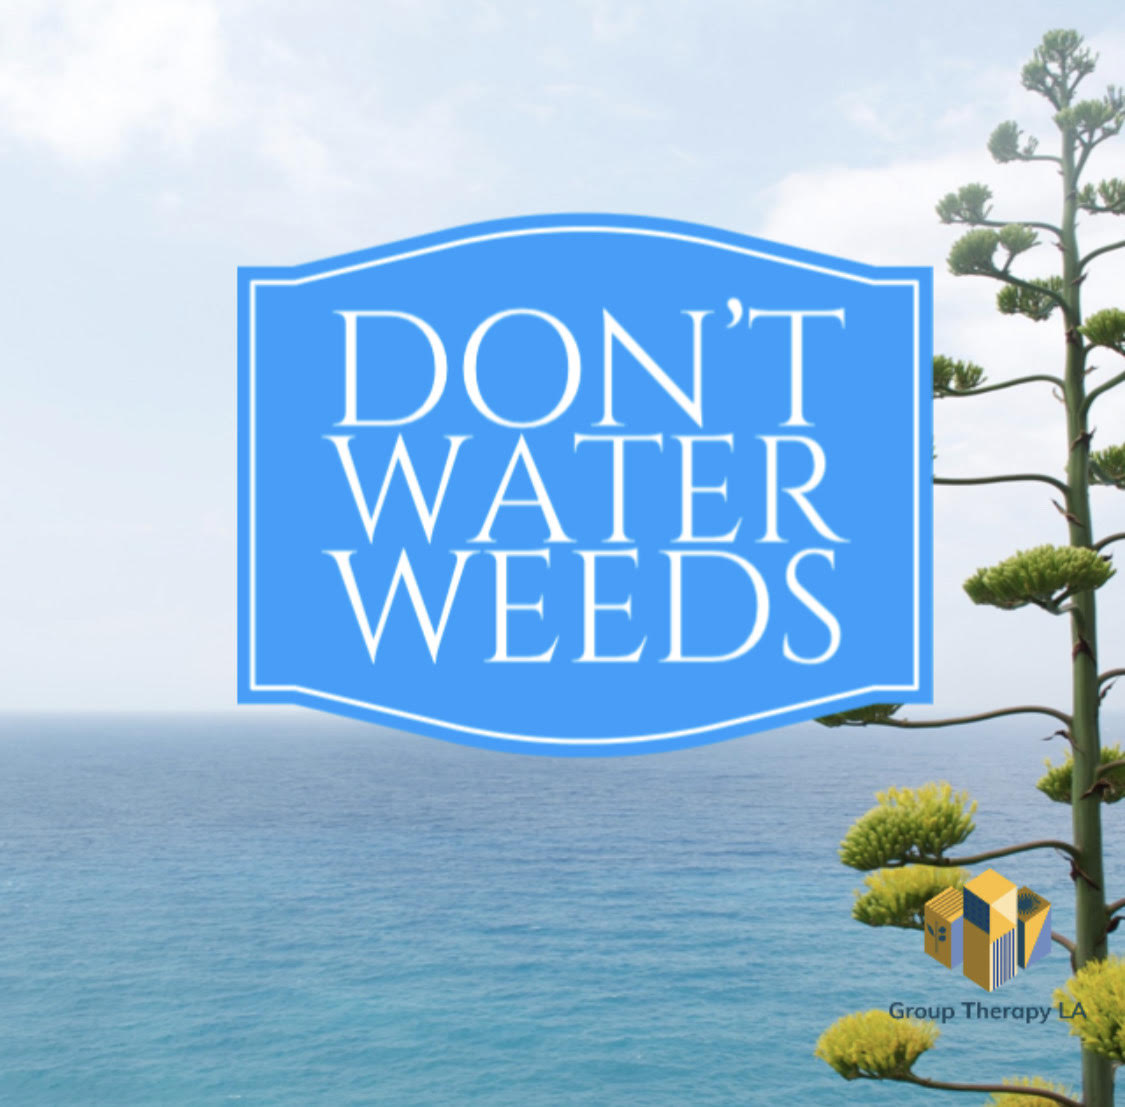 Don’t water weeds